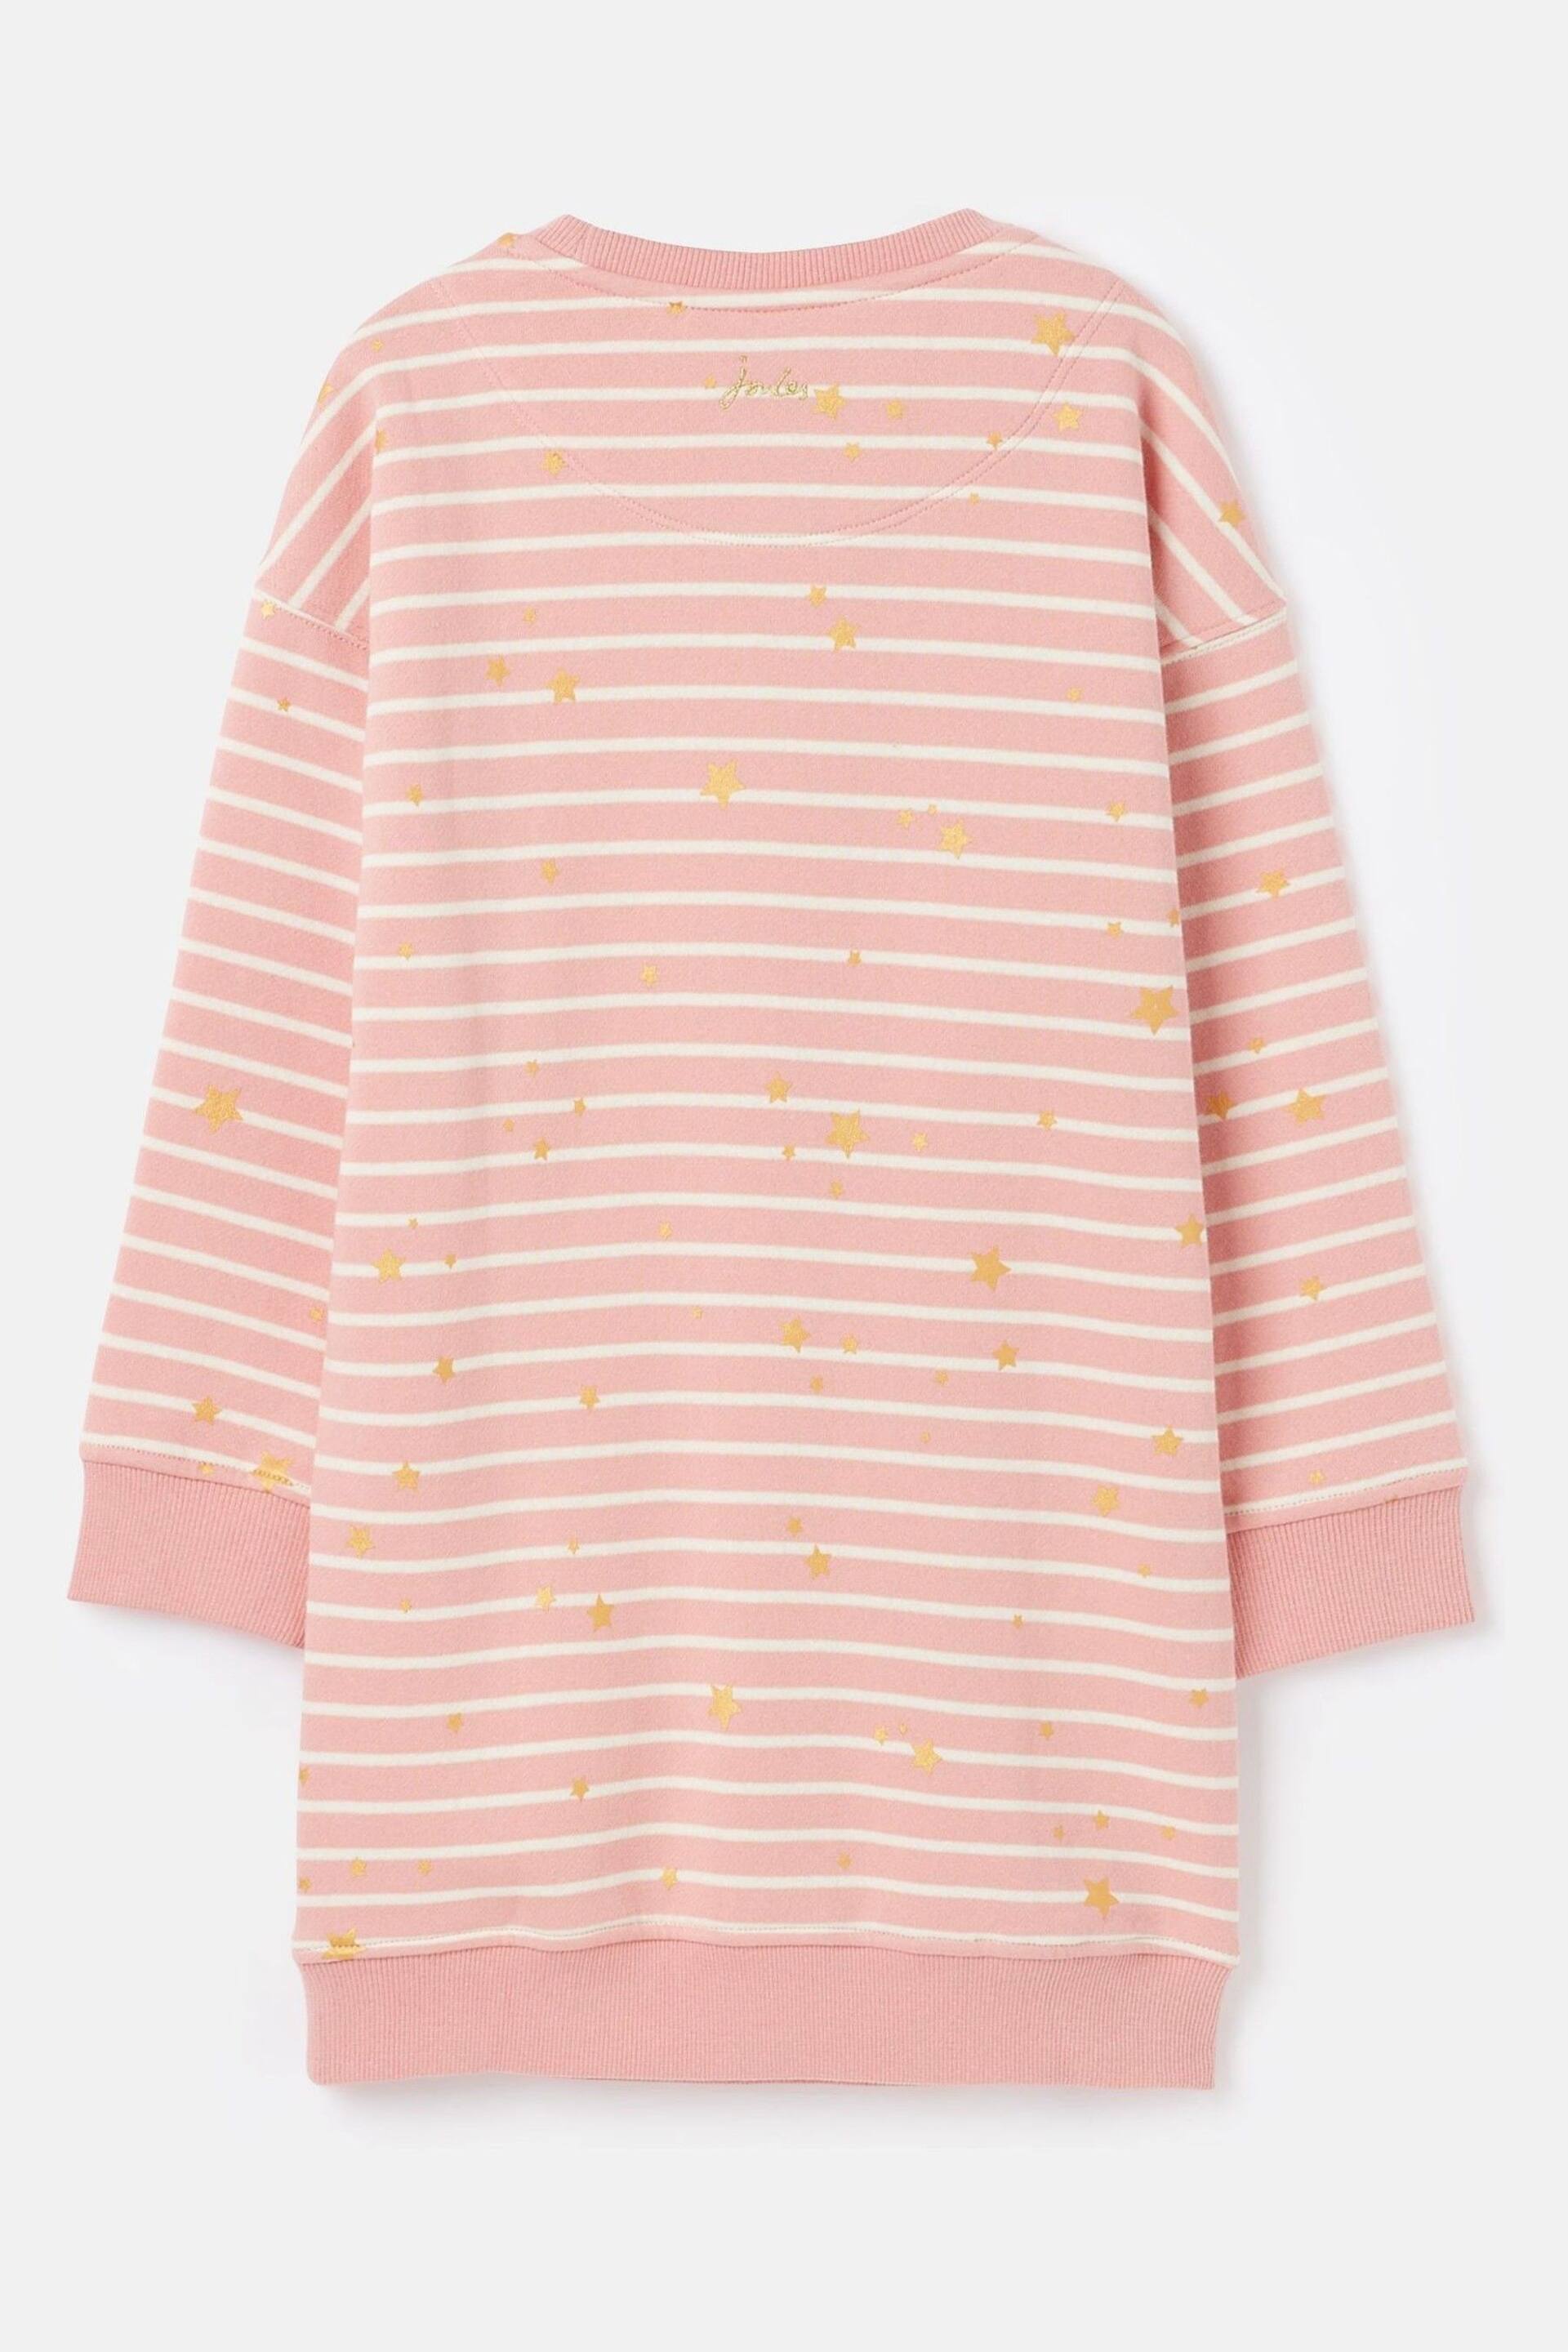 Joules Poppy Pink Striped Sweater Dress - Image 2 of 5